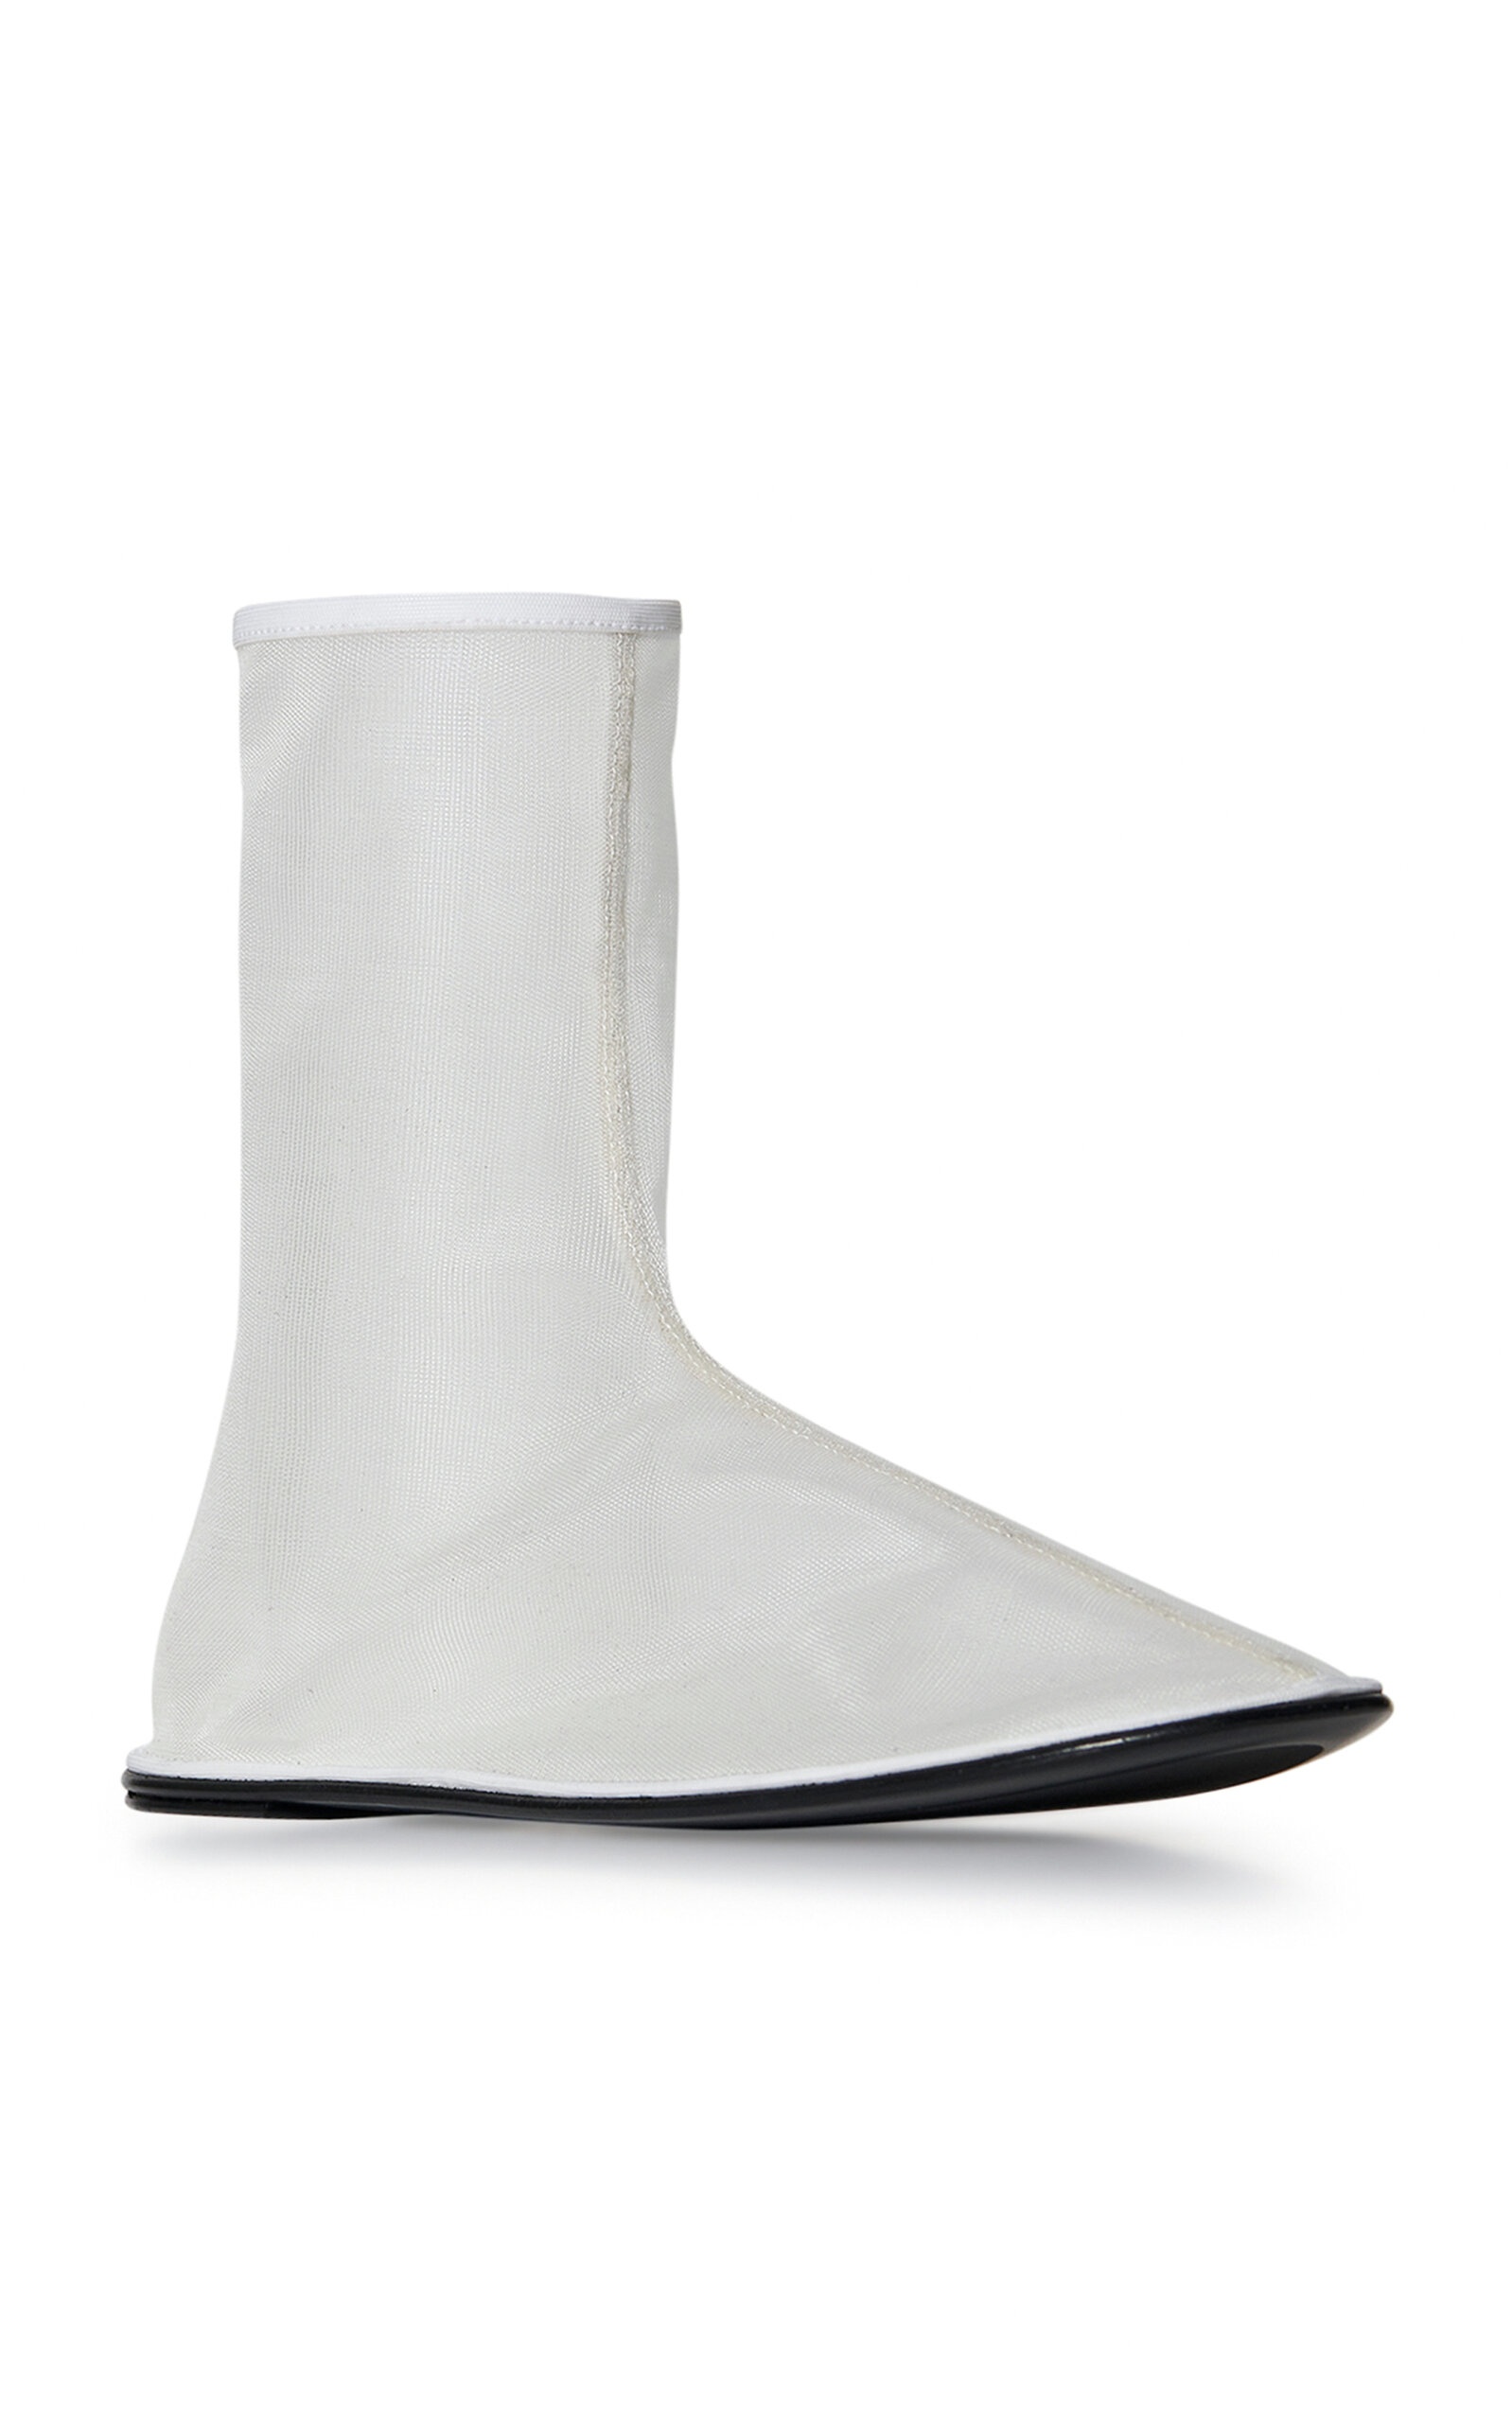 Sock Mesh Ankle Boots white - 2